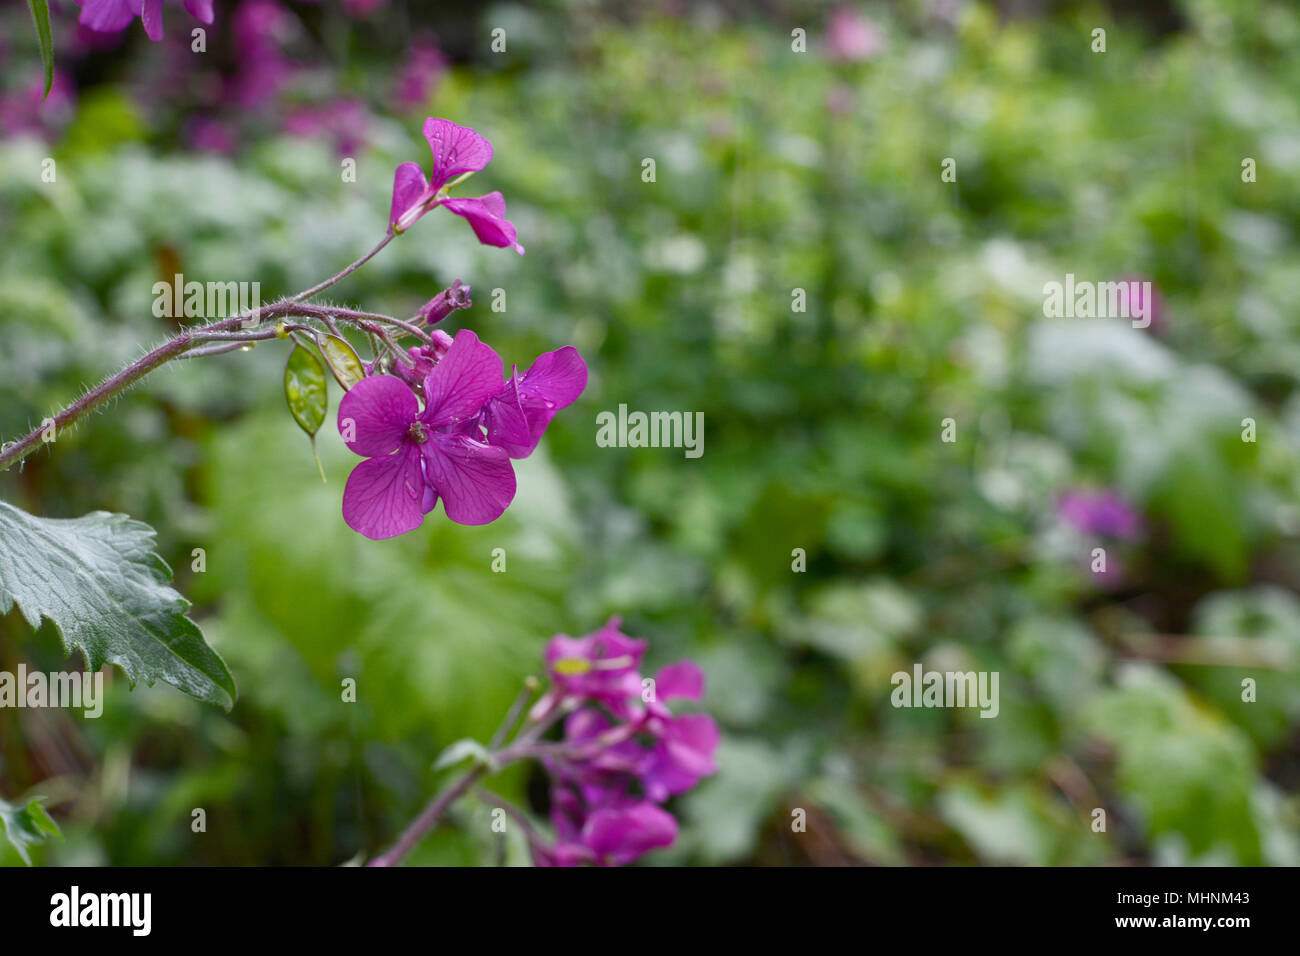 Delicate purple honesty flowers caught in the rain, against a rich green garden background Stock Photo